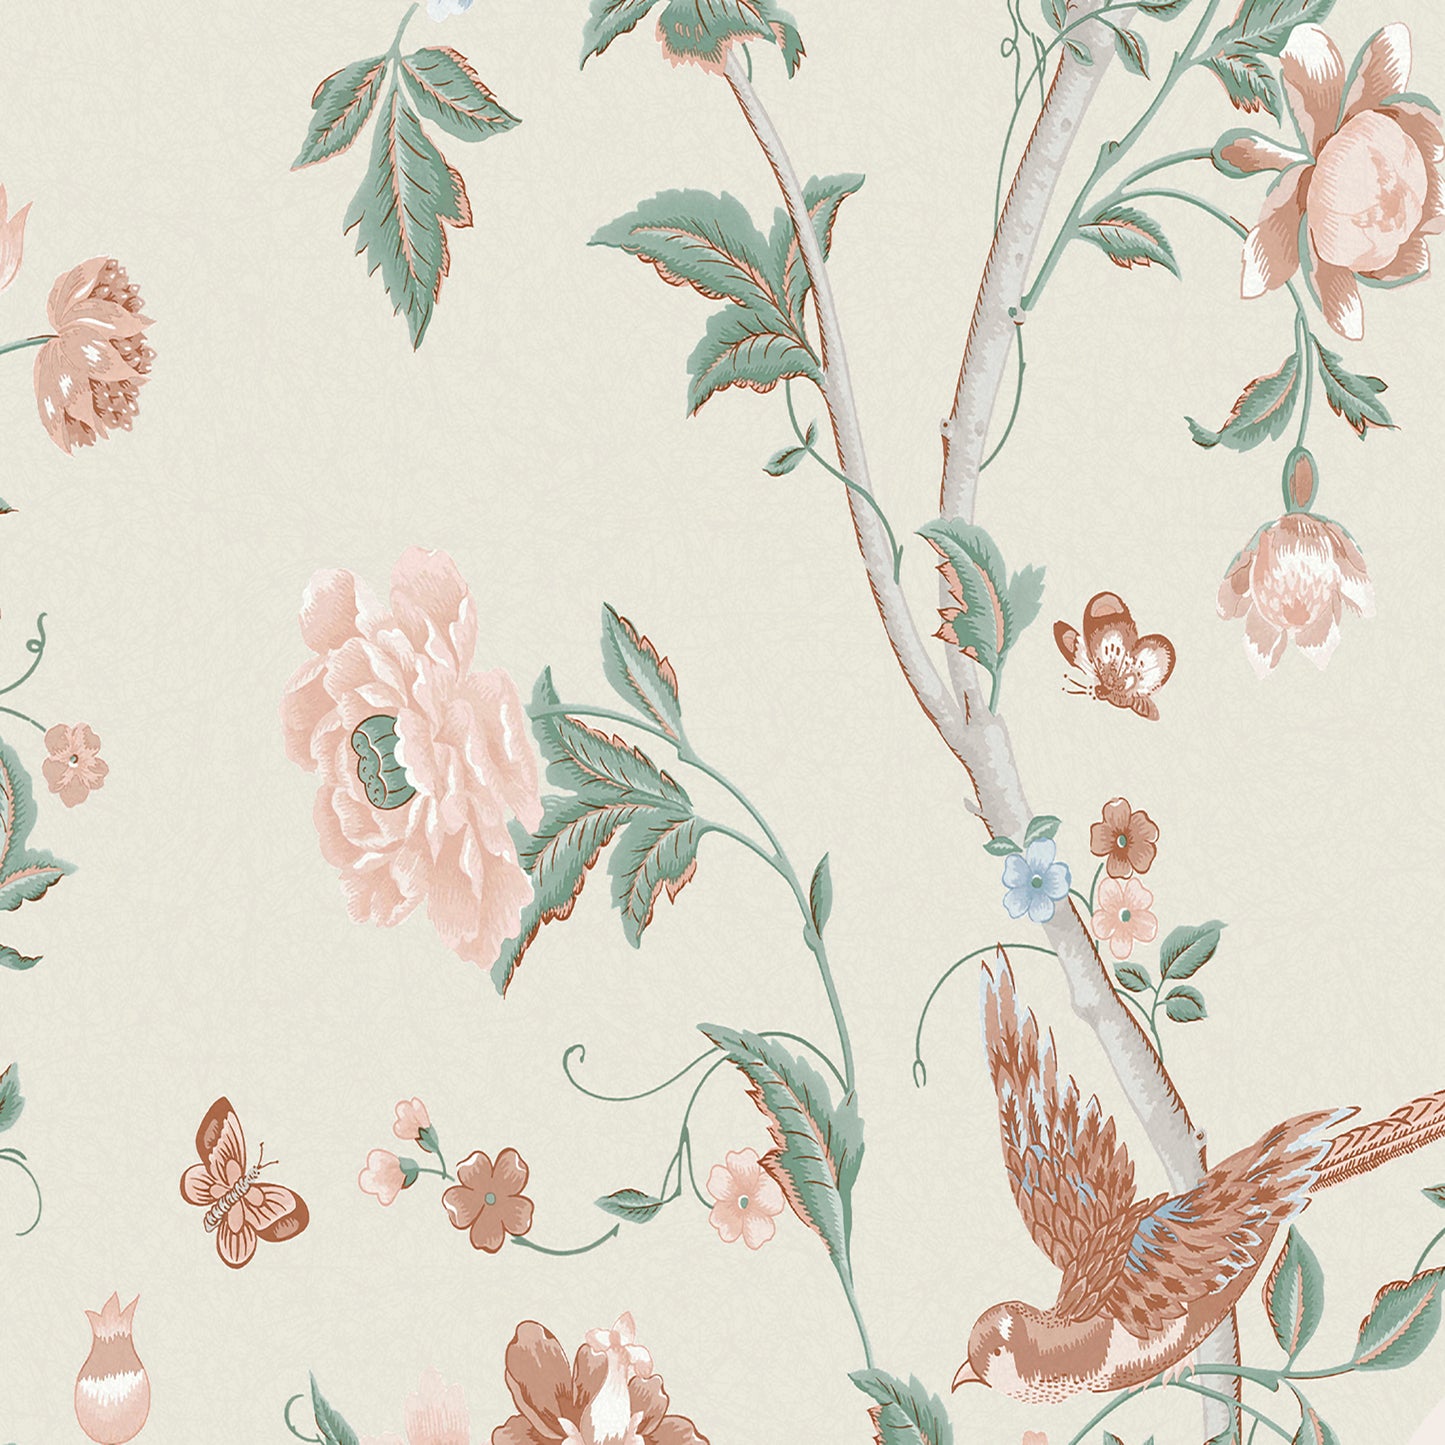 Purchase Laura Ashley Wallpaper Pattern number 120133 Summer Palace Sage and Apricot Removable